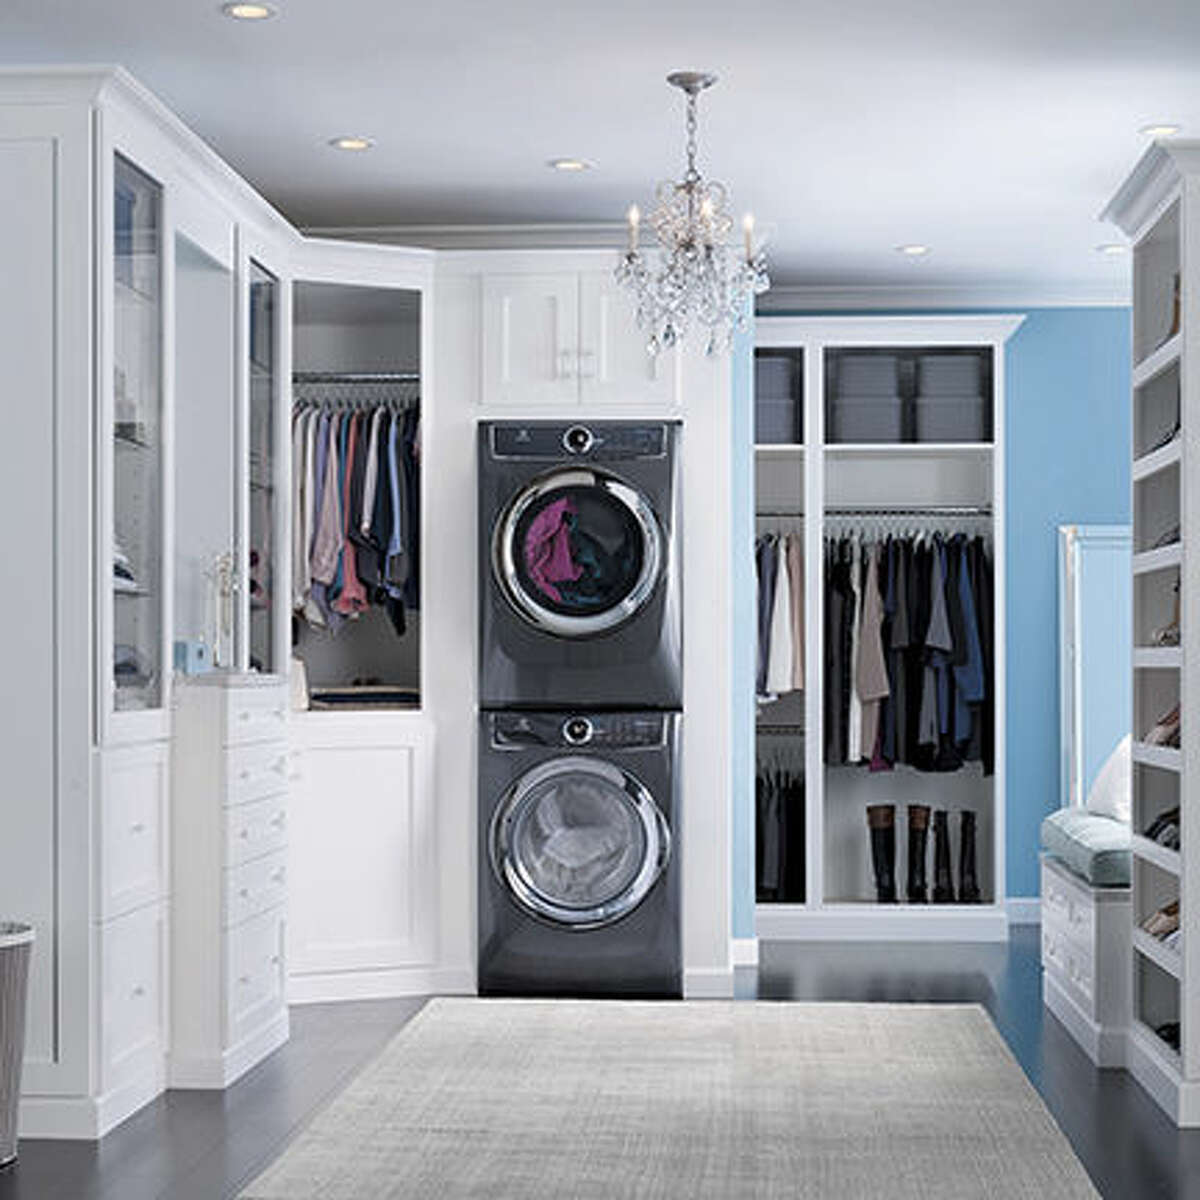 5 Ways to Add Luxury to Your Laundry Room